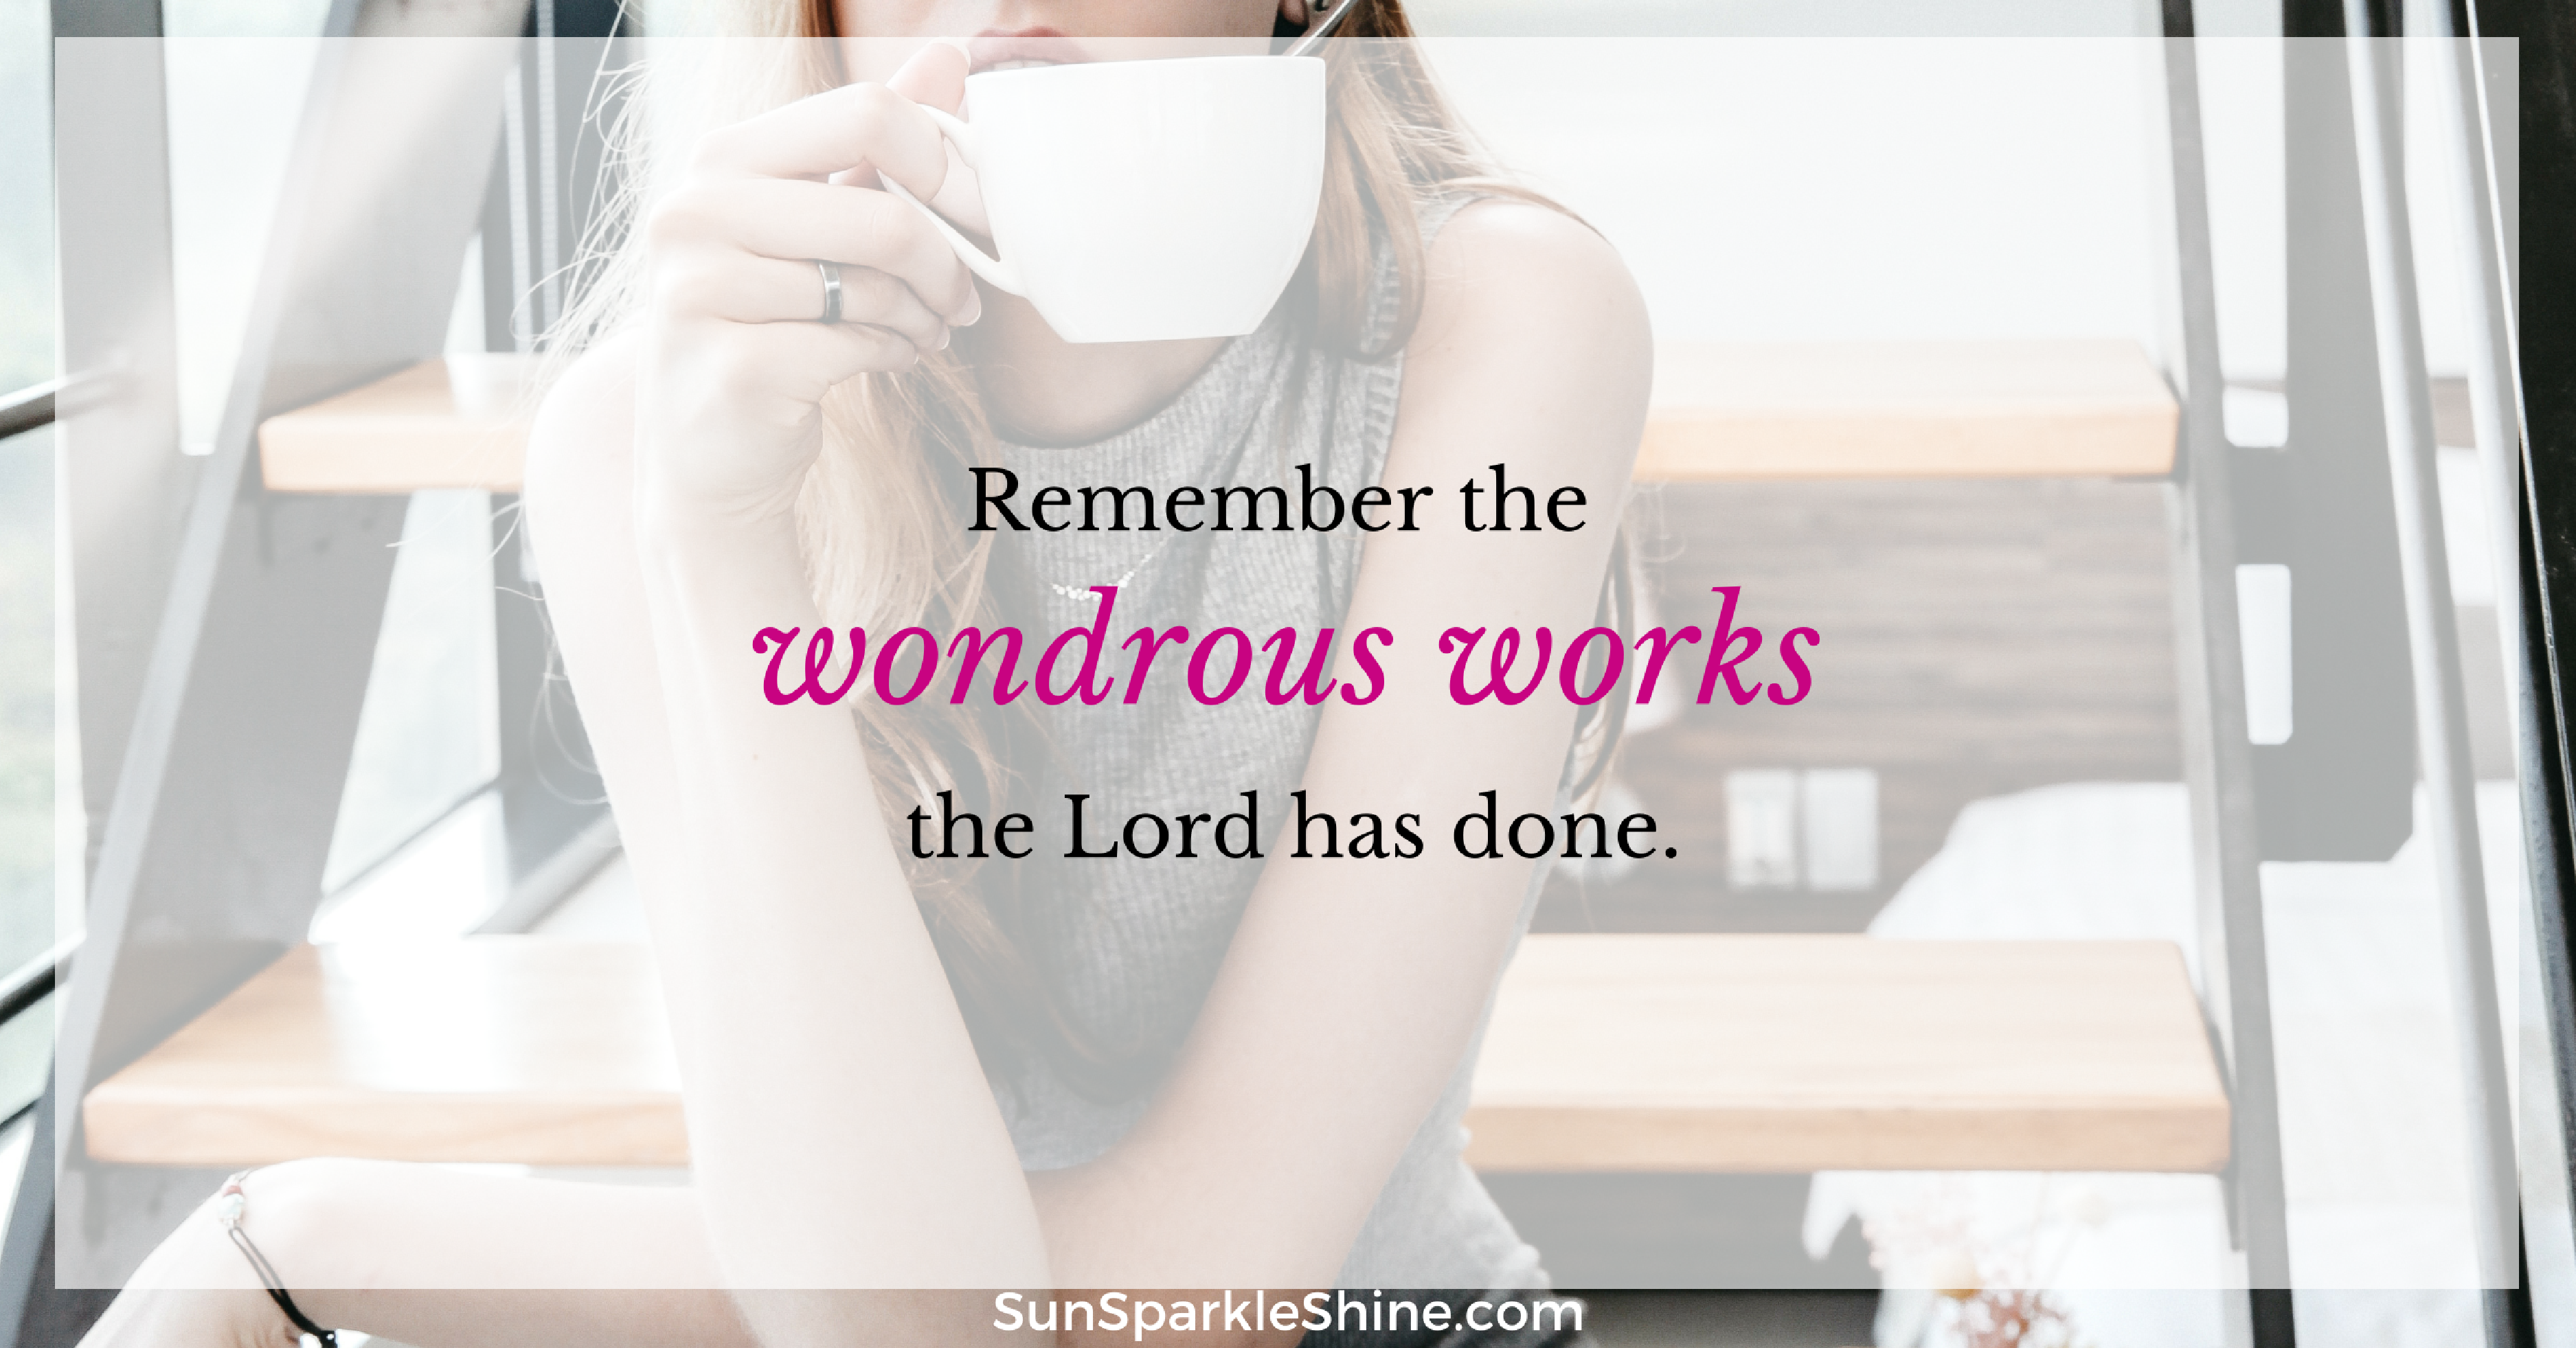 Before jumping into the New Year take some time to look back and reflect on God's wonders. It will give you the confidence to move forward in faith. 